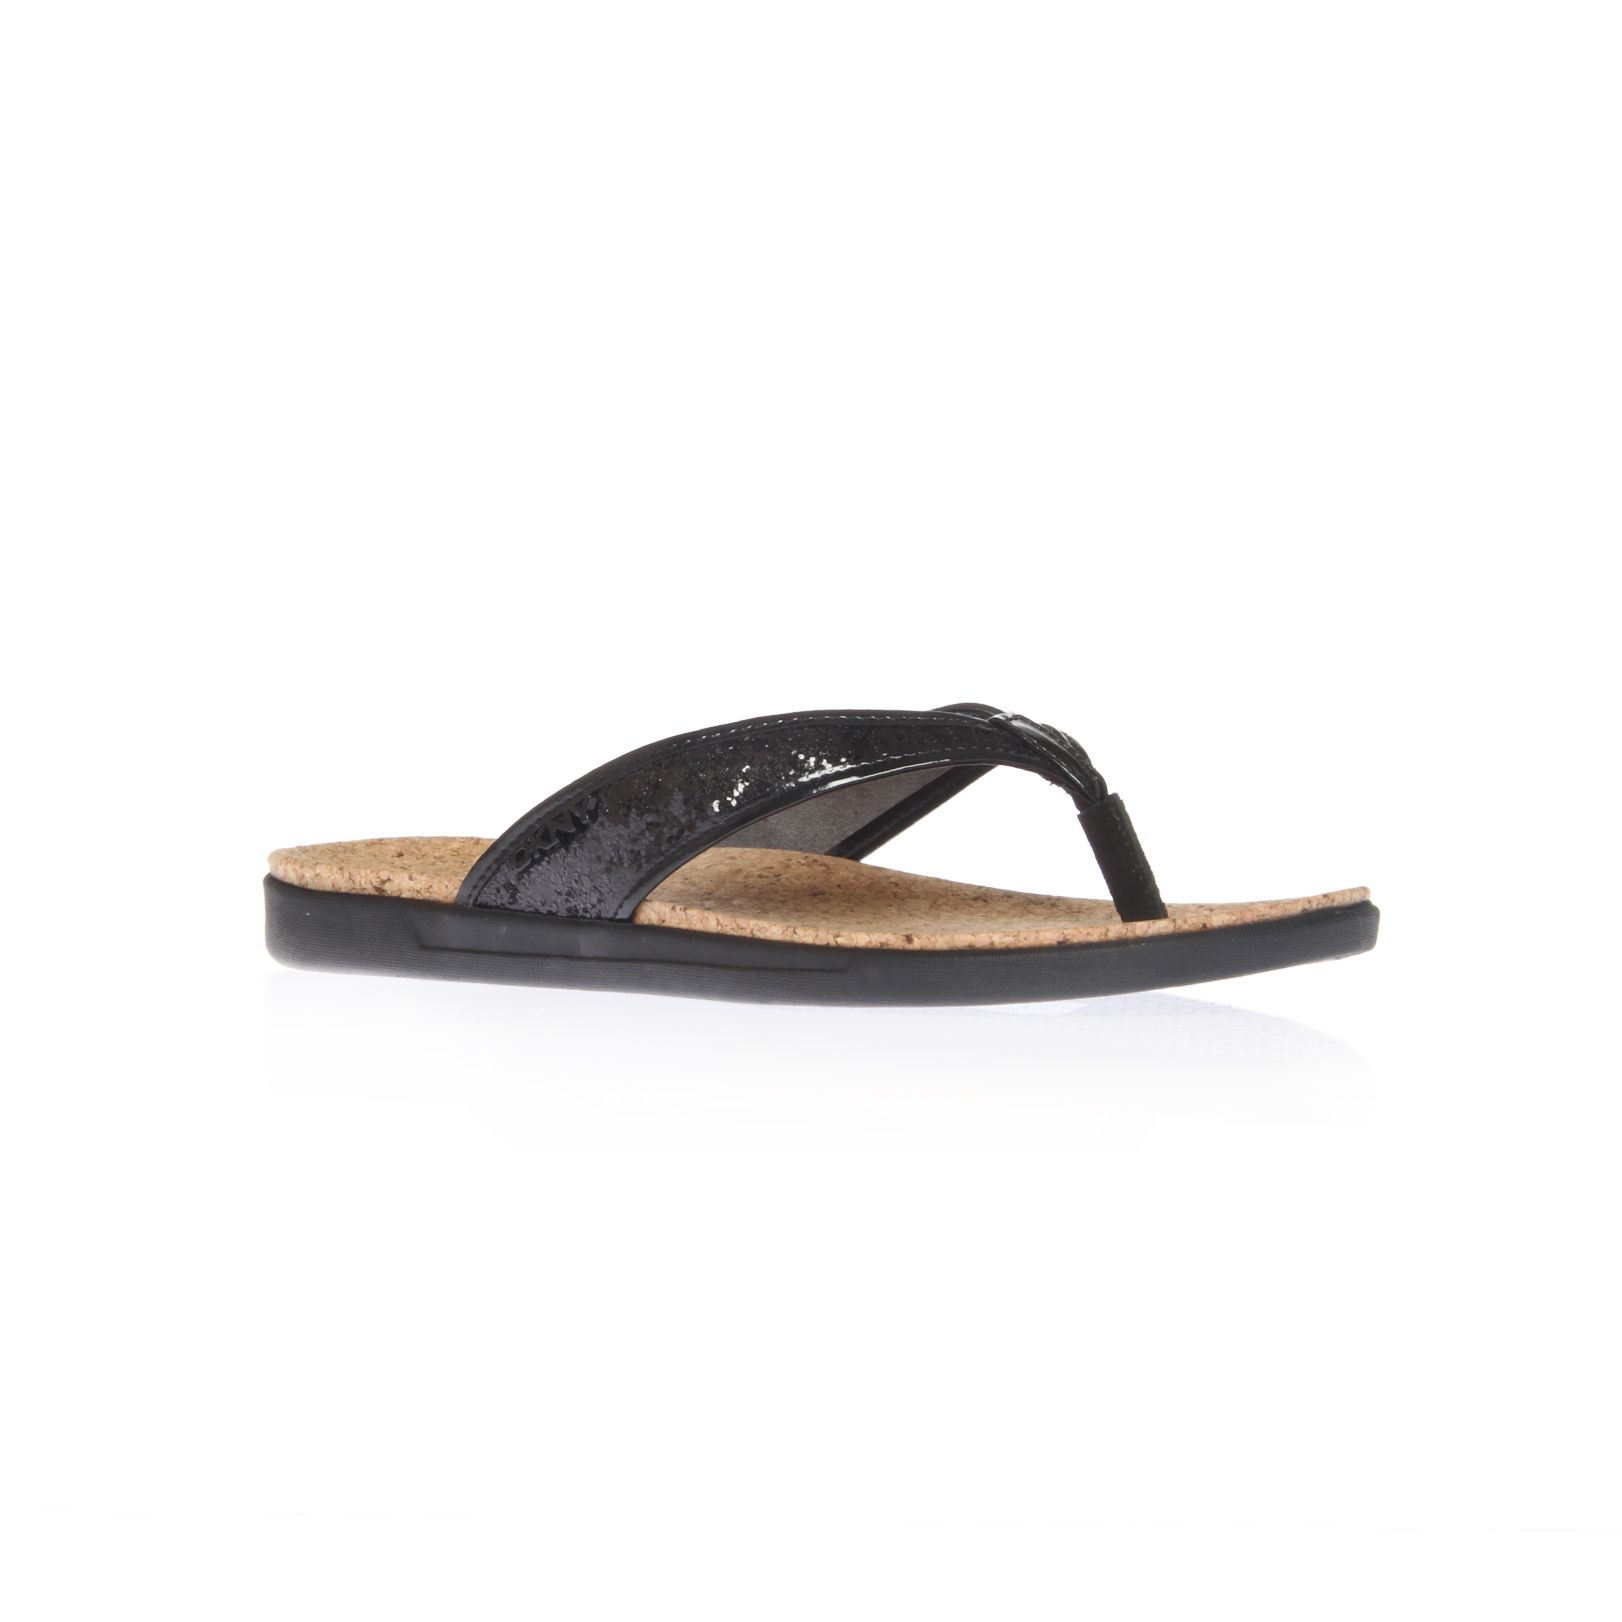 Dkny Vicky Flip Flop Sandals in Brown | Lyst